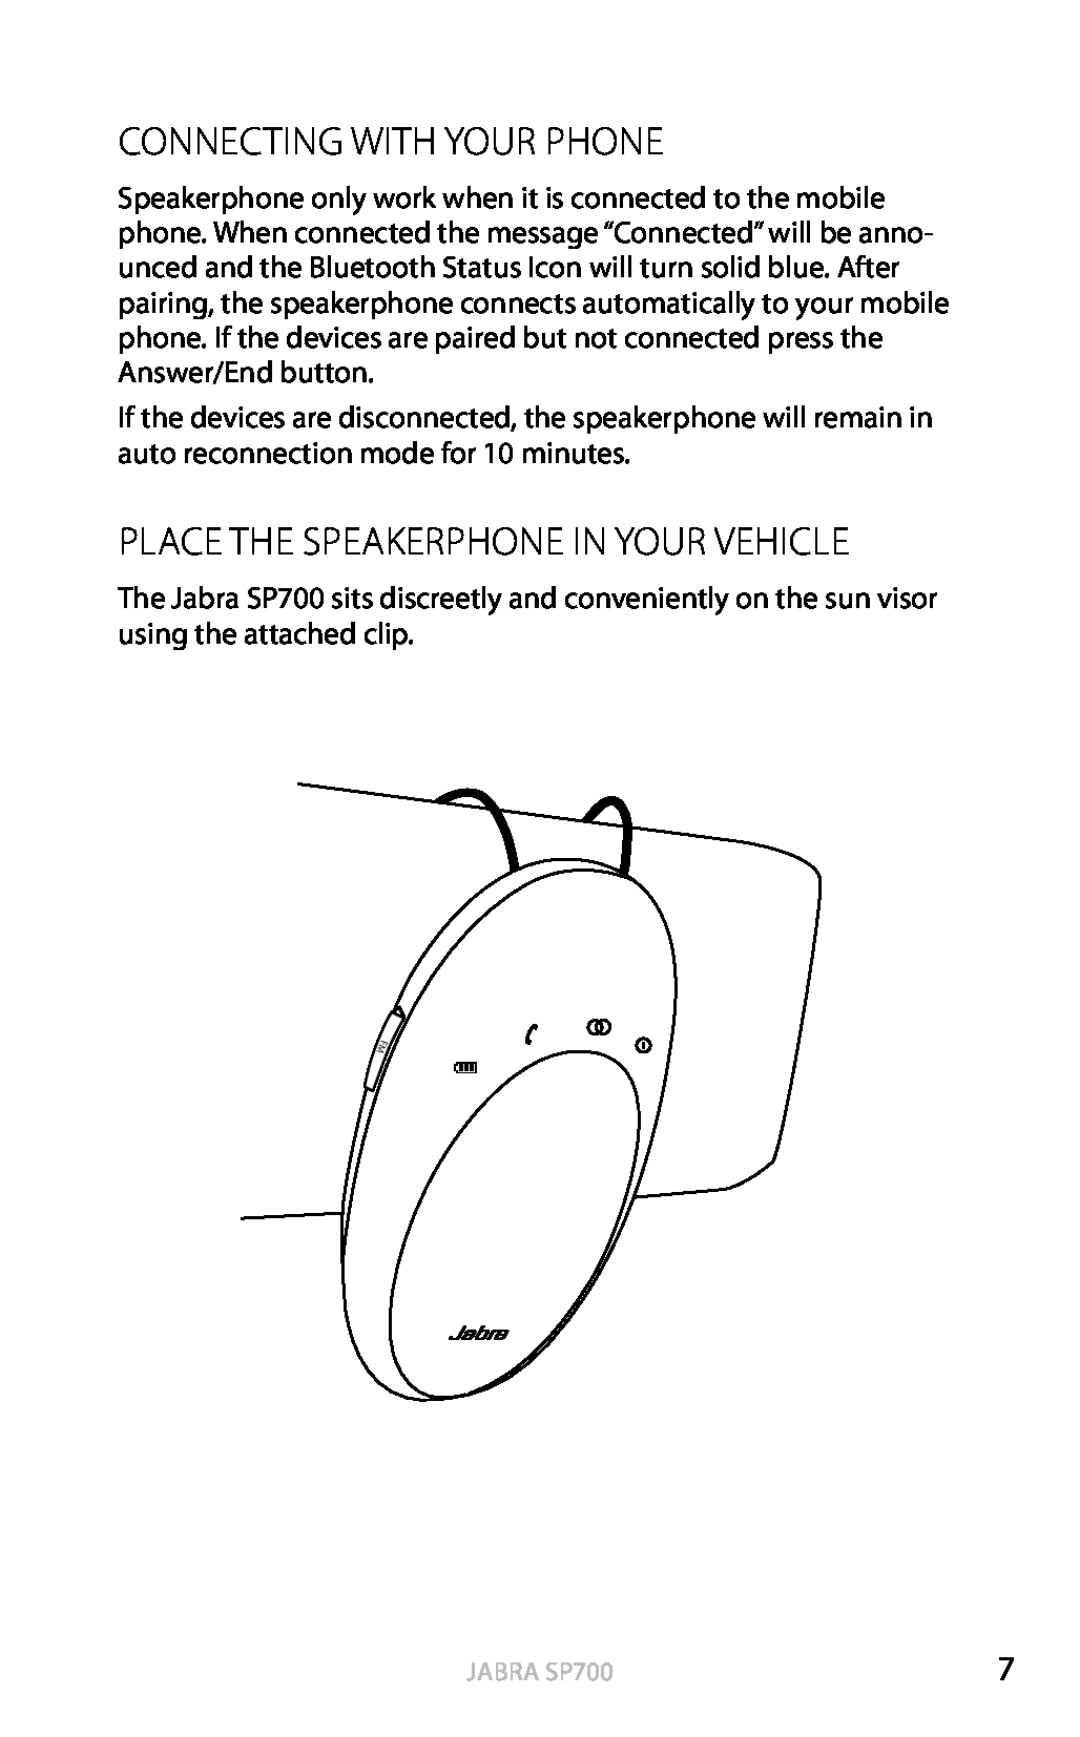 Lennox Hearth SP700 user manual Connecting with your phone, Place the speakerphone in your vehicle, english 